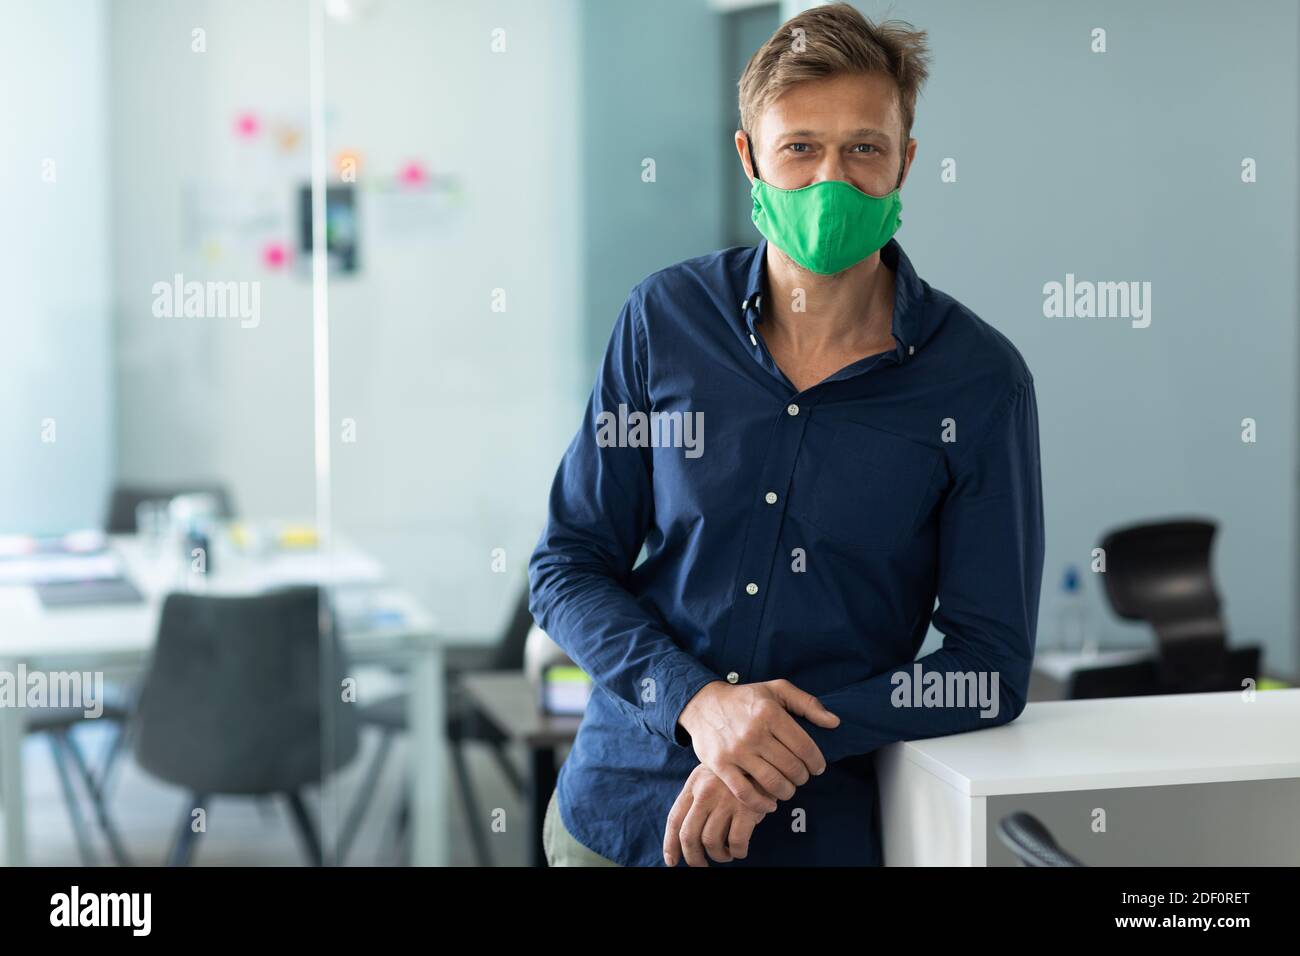 Caucasian man wearing face mask in an office Stock Photo